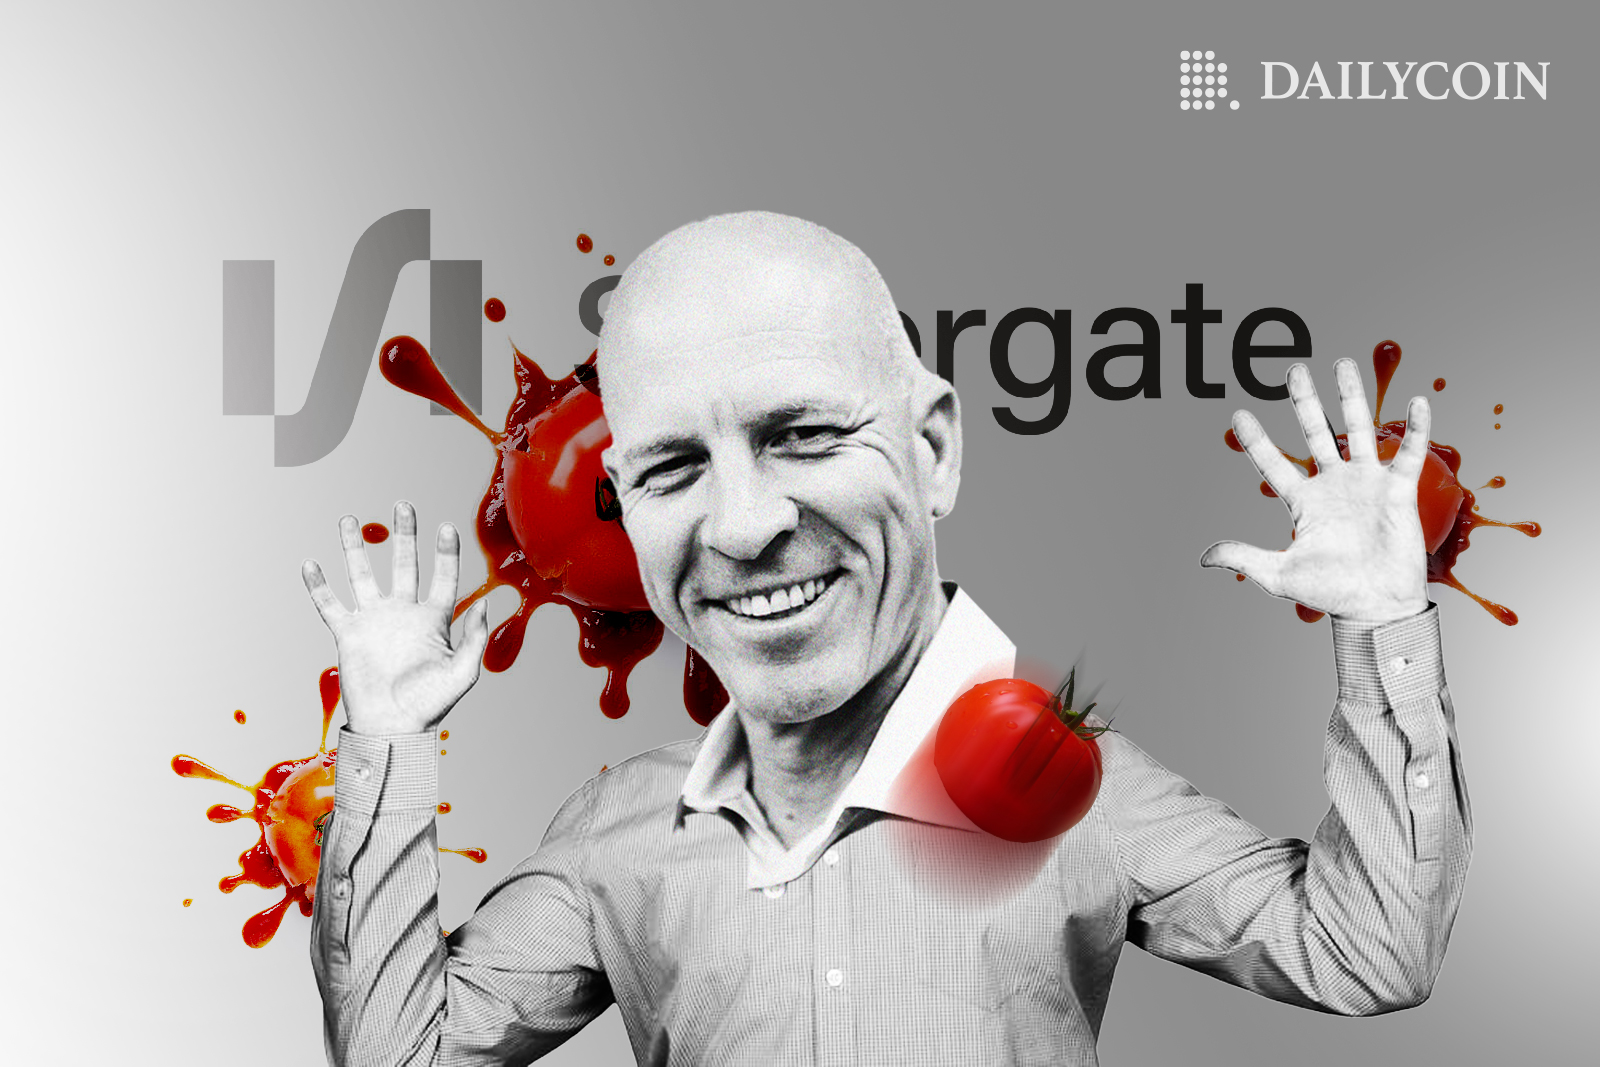 Silvergate CEO Alan Lane topped with tomatoes in front of Silvergate logo